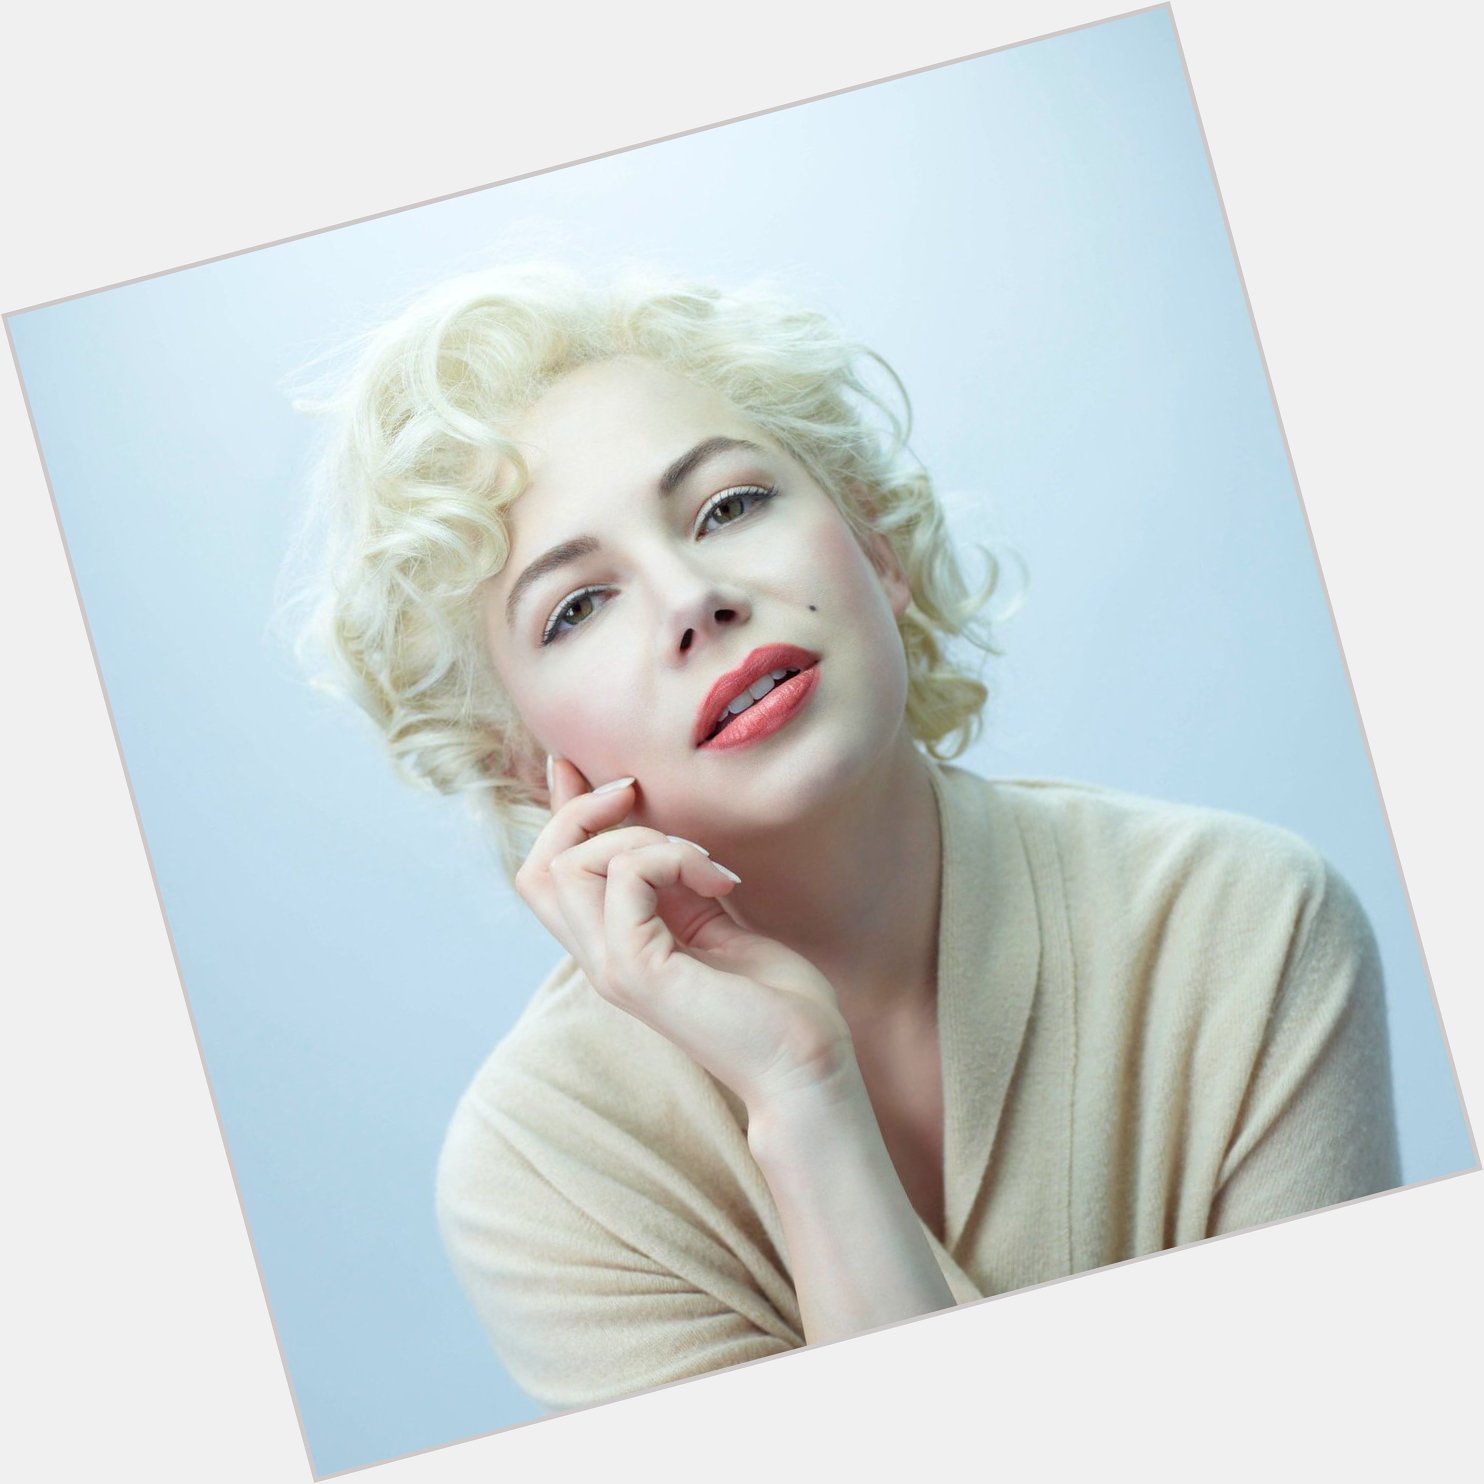 Happy Birthday to one of very talented actress Michelle Williams 